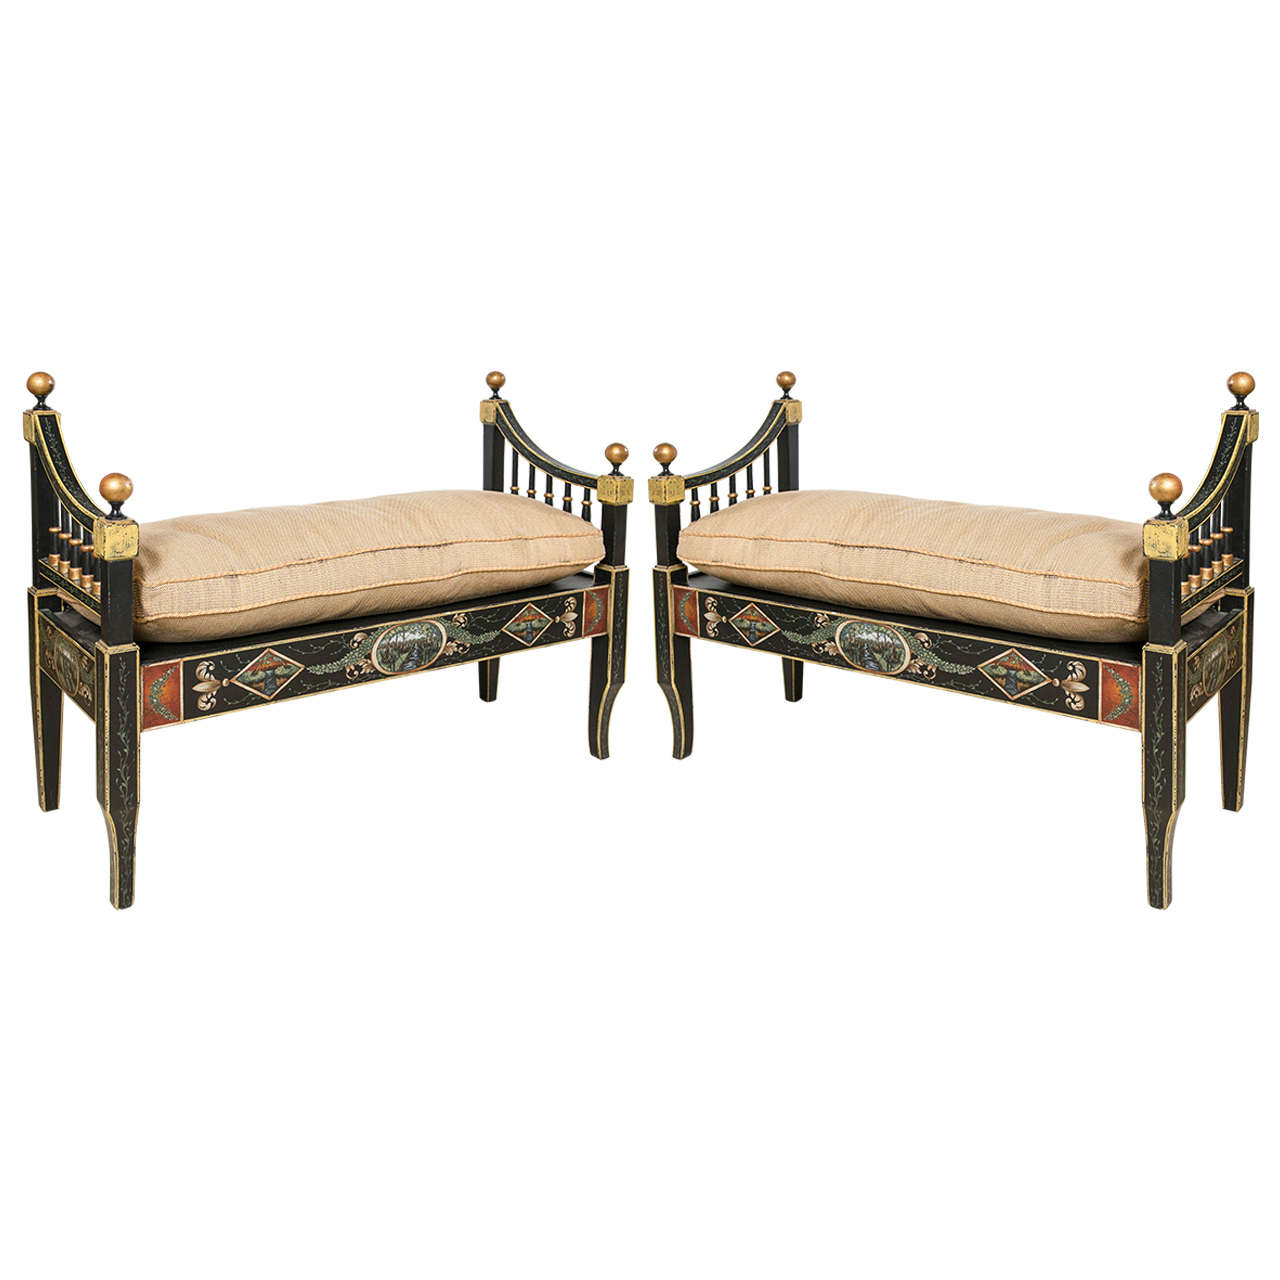 Pair of Hollywood Regency Style Ebonized and Paint Decorated Benches/Loveseats